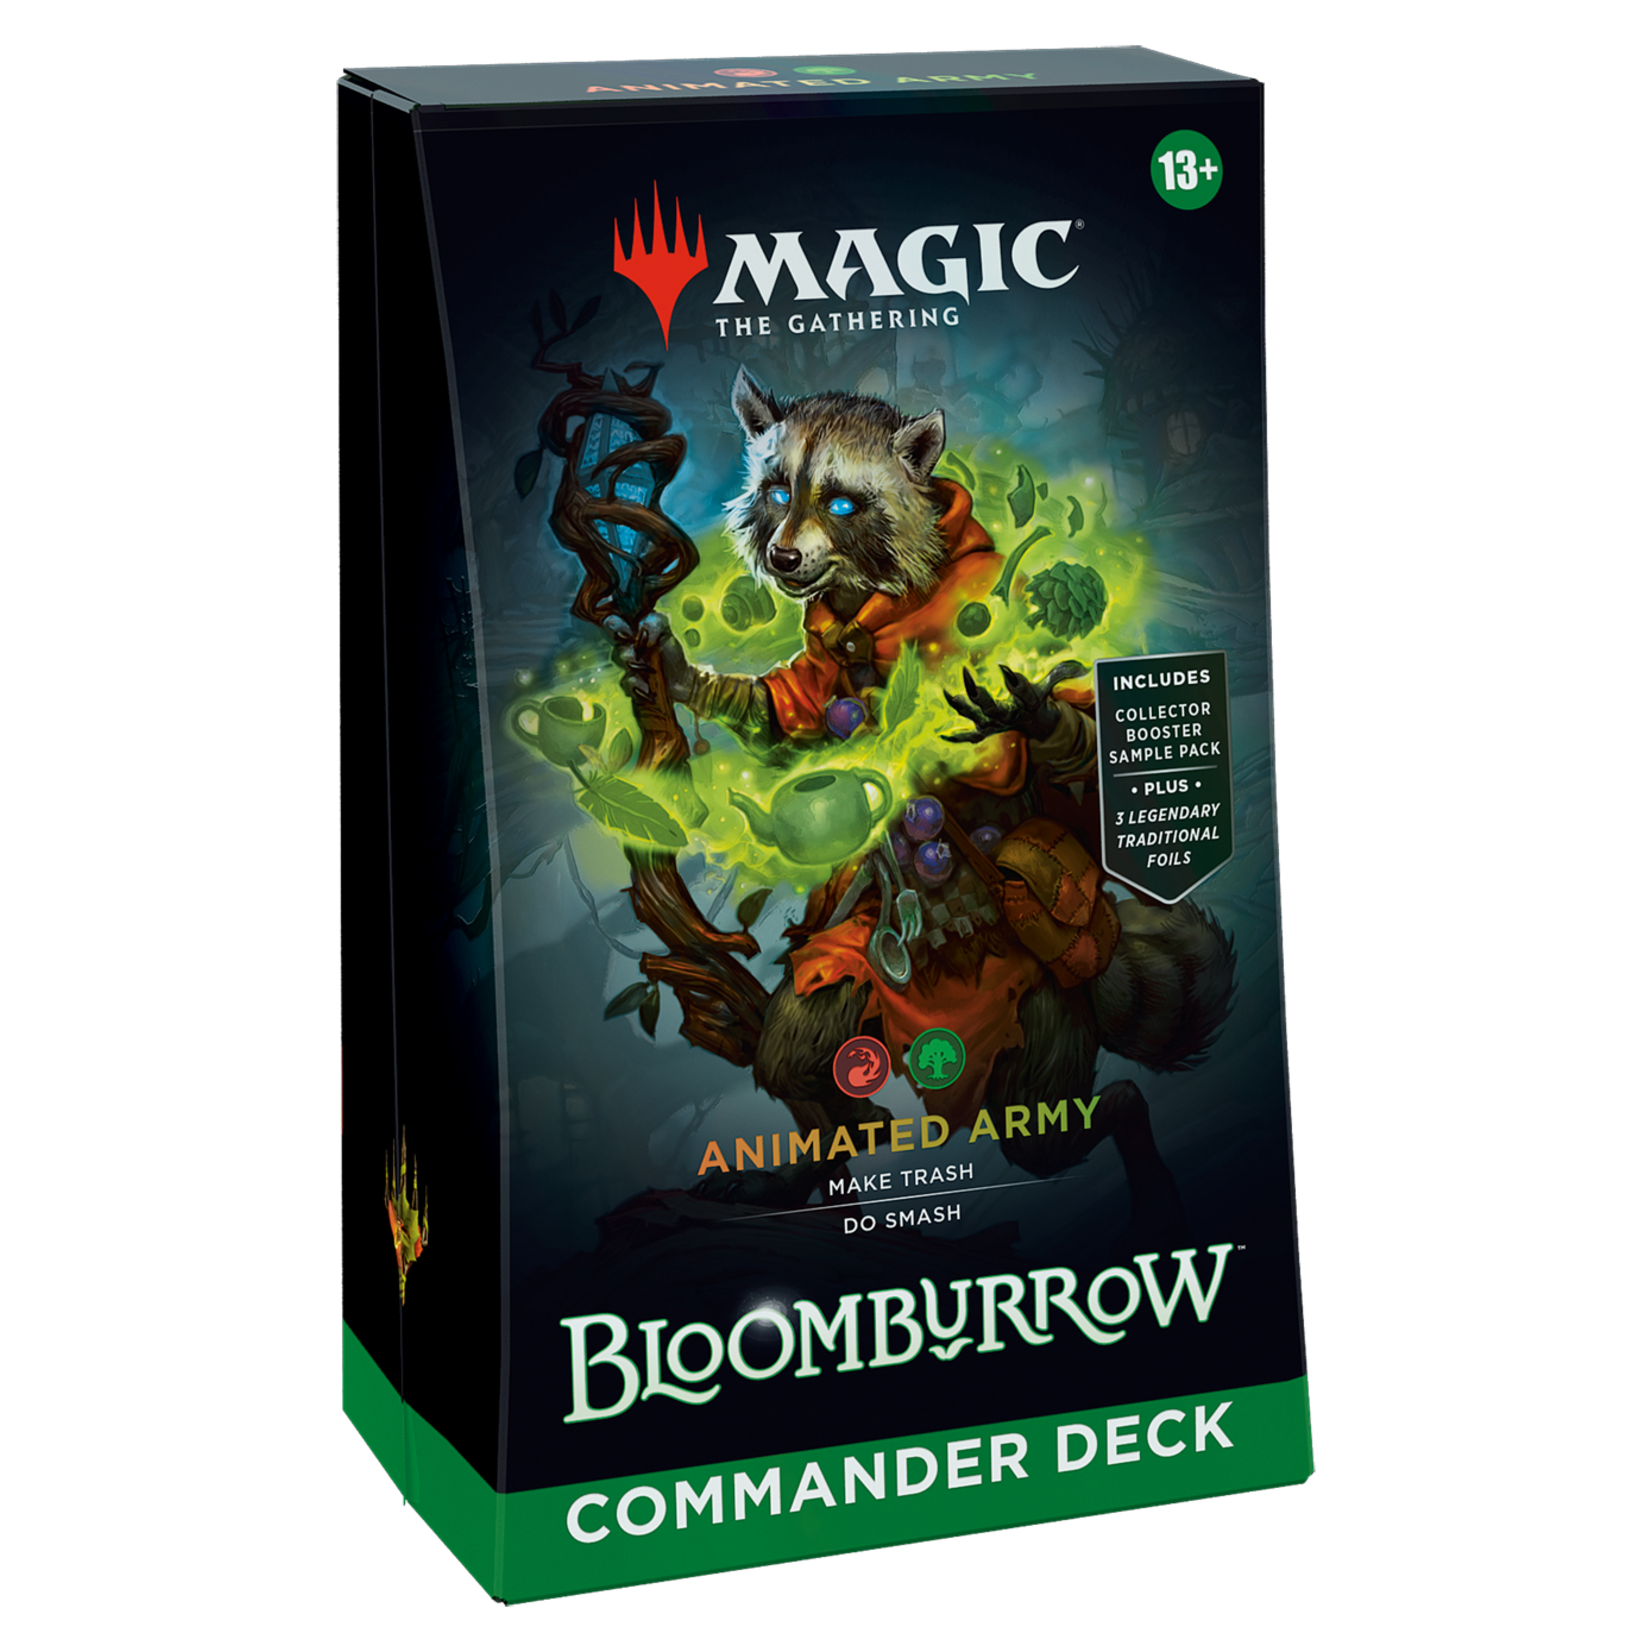 Magic: The Gathering Magic: The Gathering – Bloomburrow Commander Deck (Animated Army)